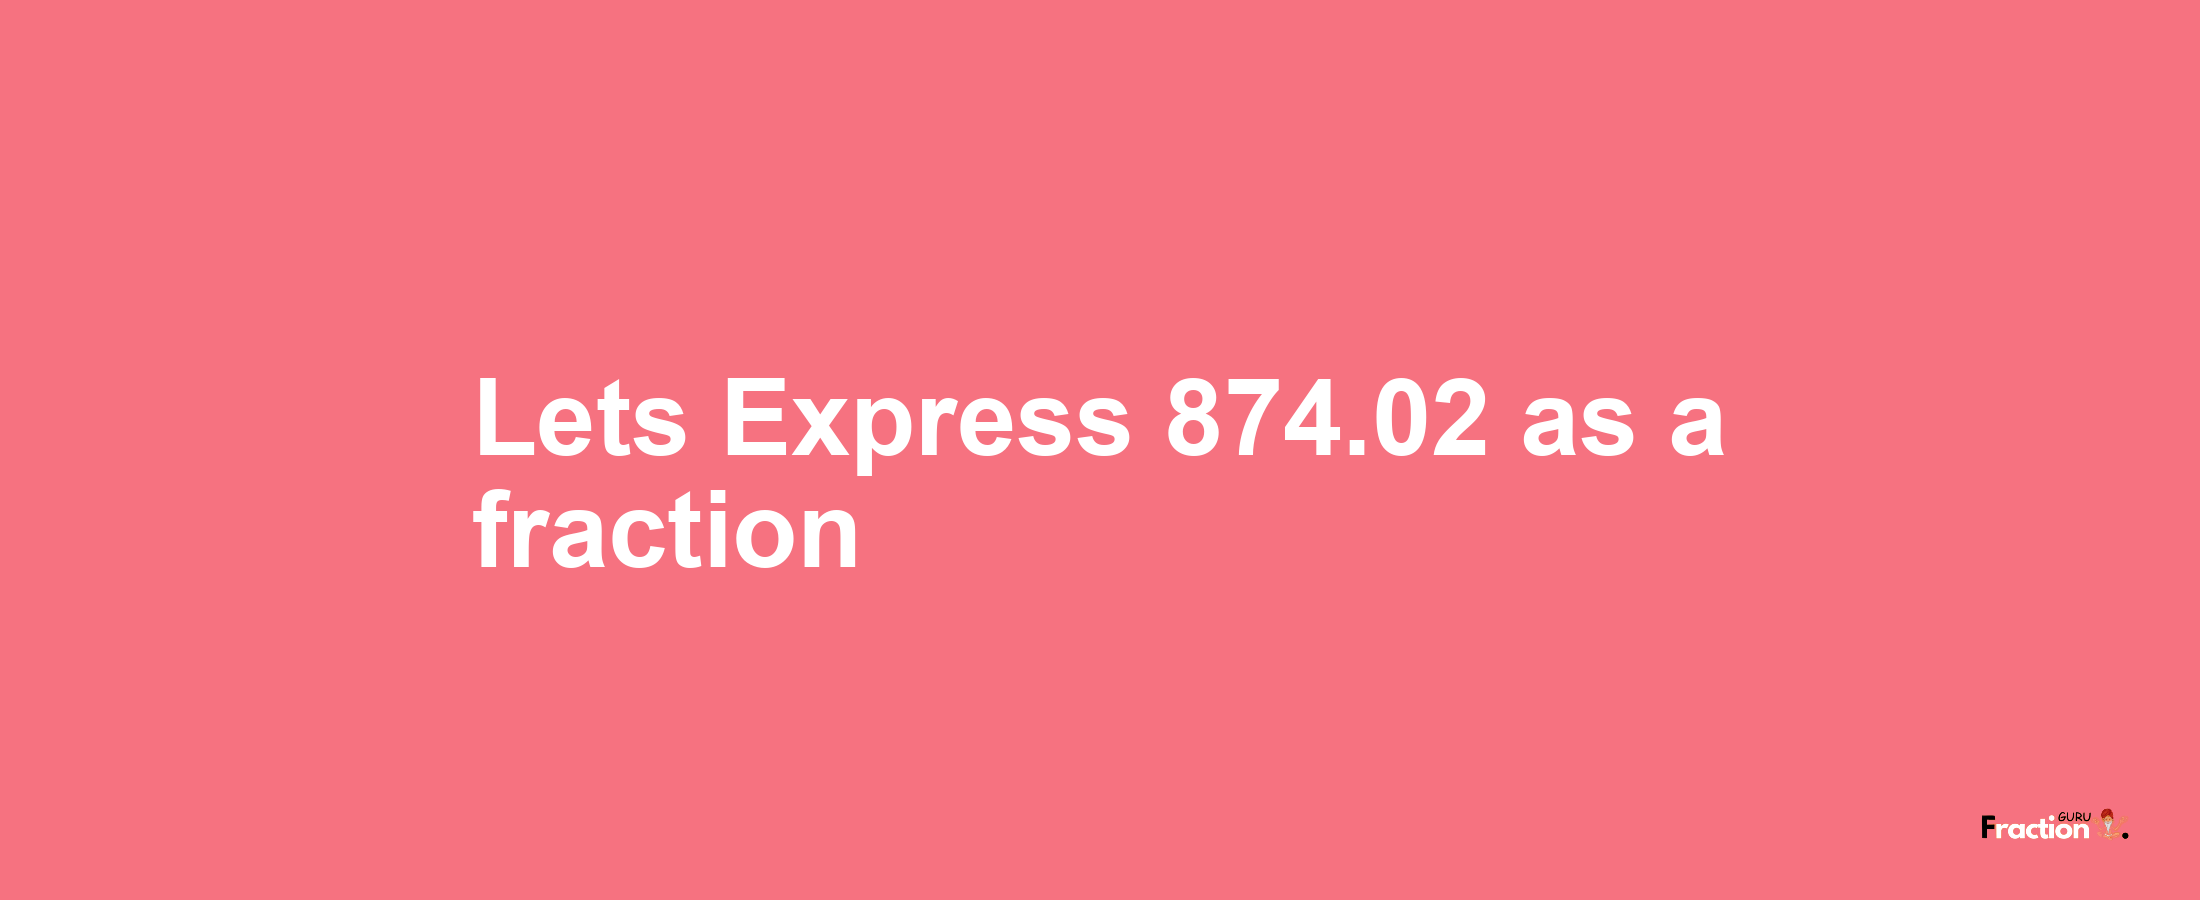 Lets Express 874.02 as afraction